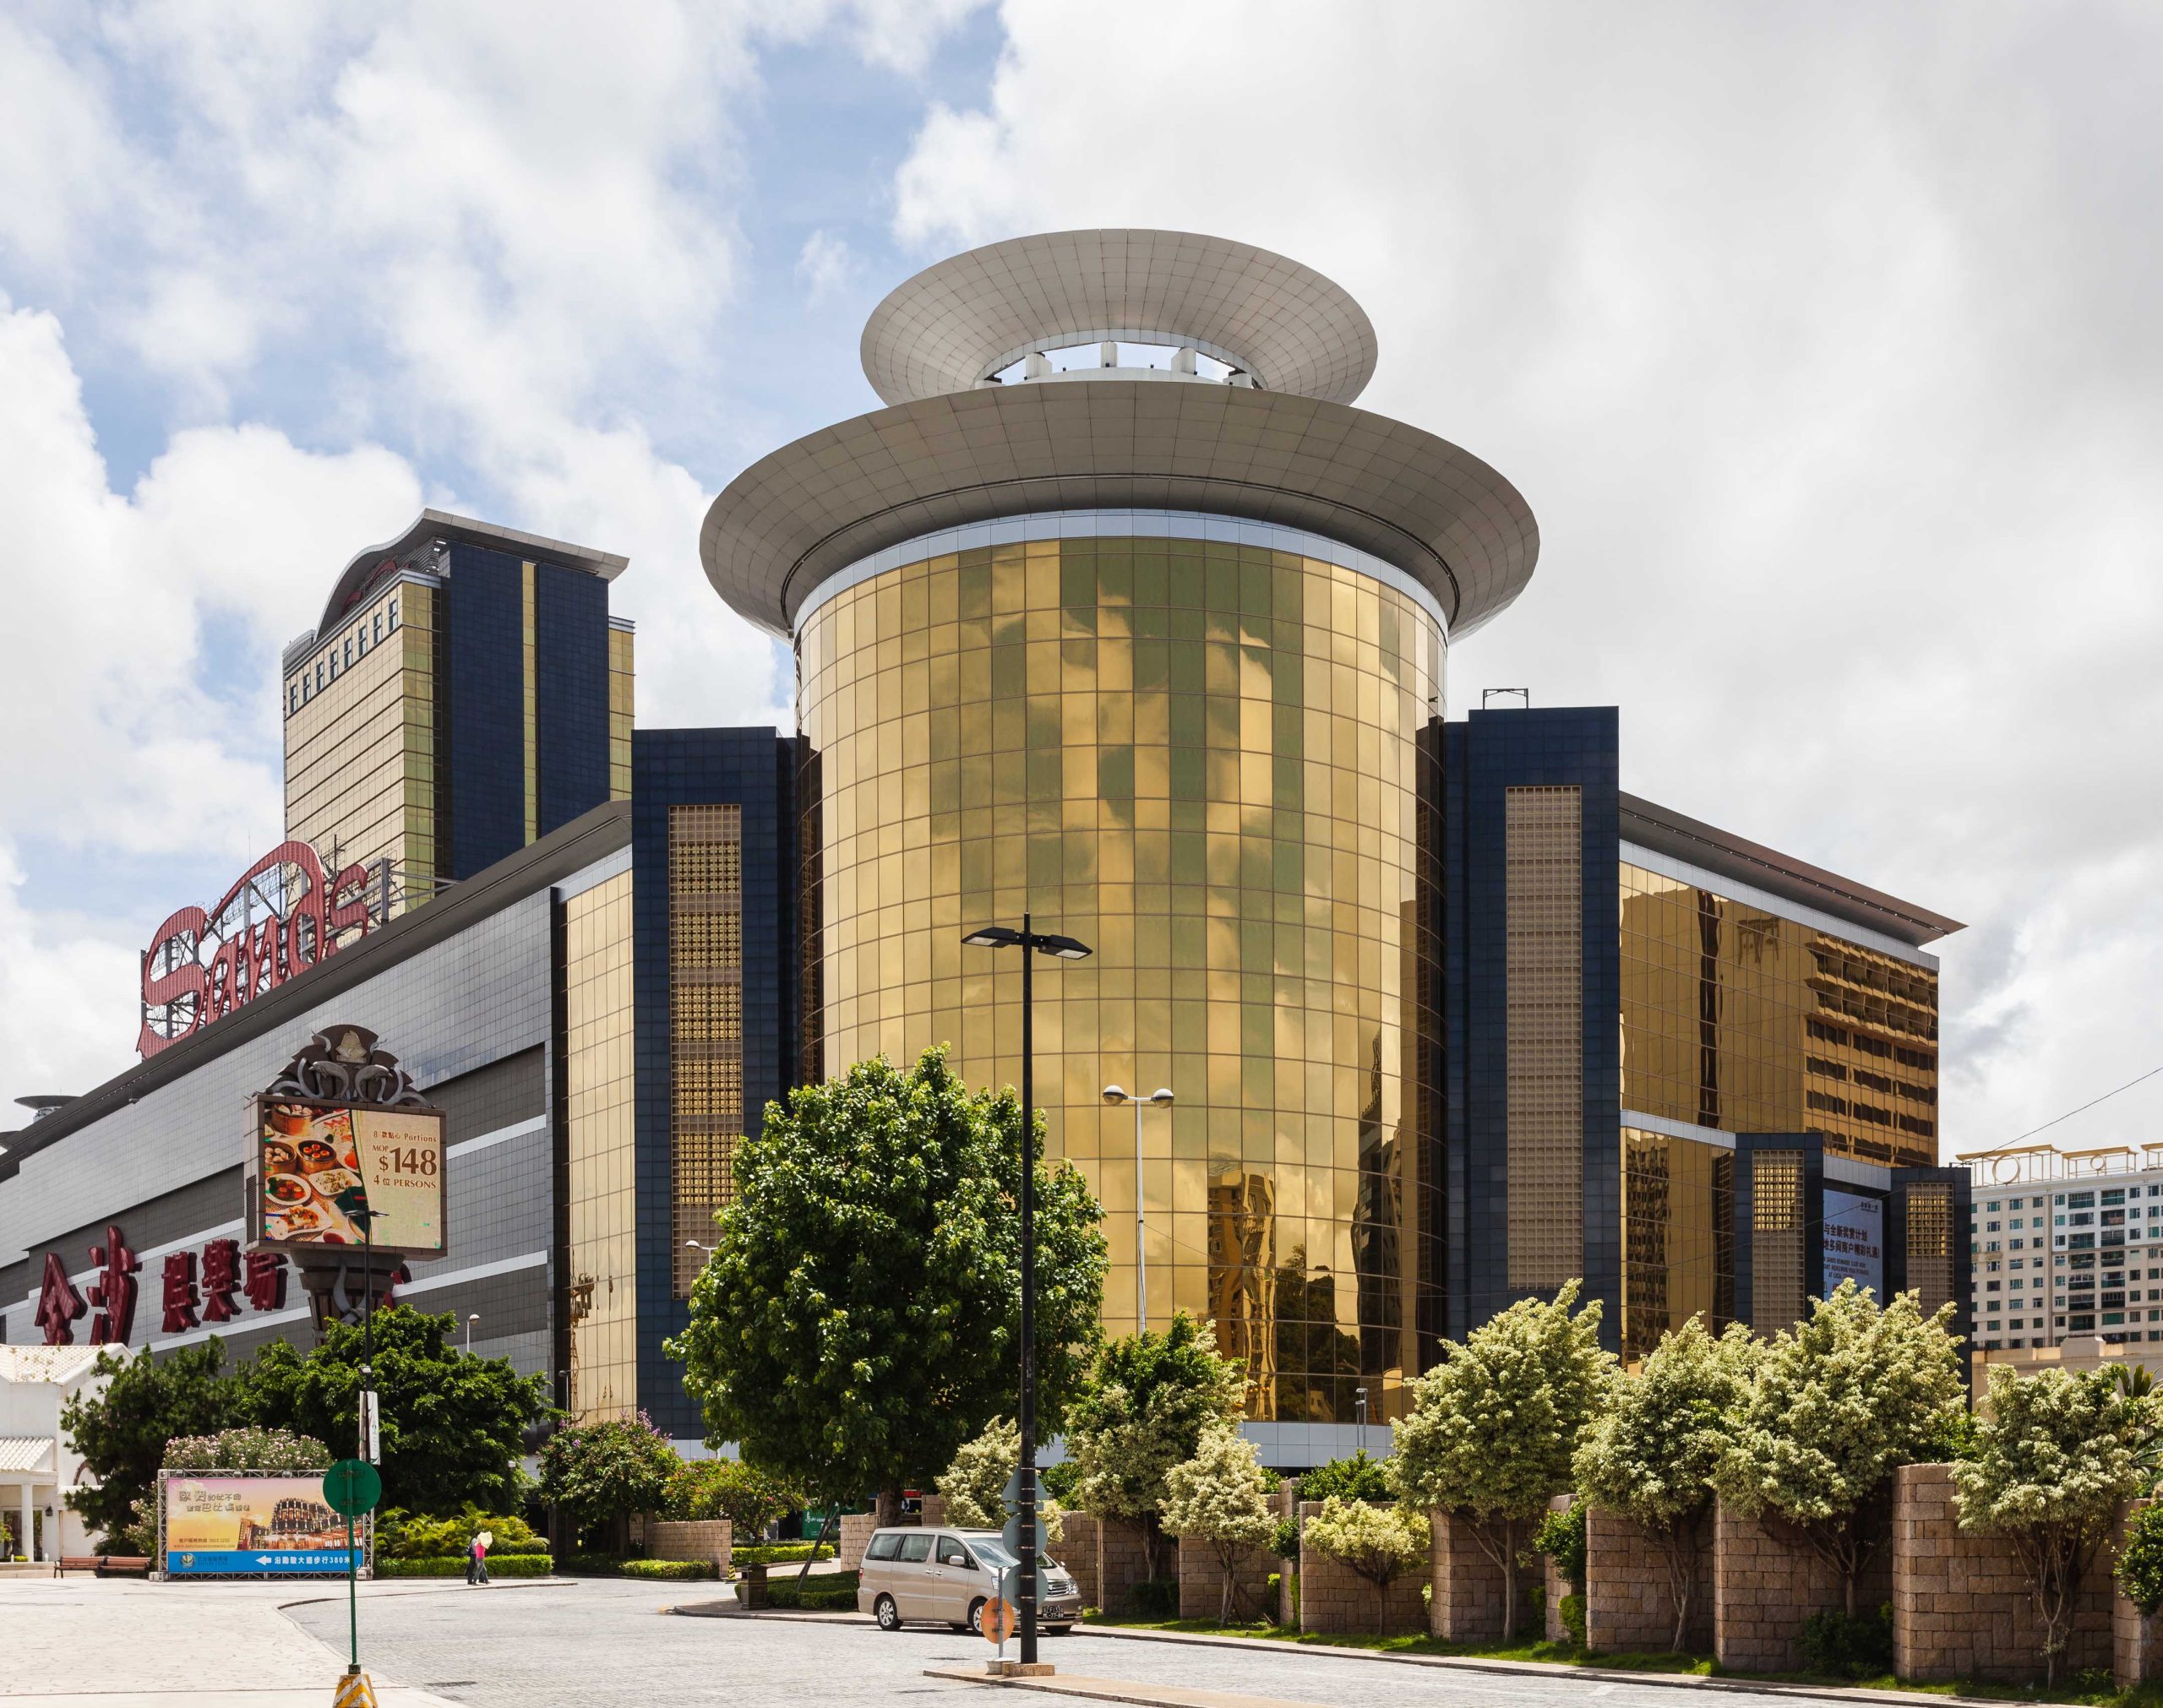 Macau Gaming Industry Reports Significant Increase in Gross Gaming Revenue for November